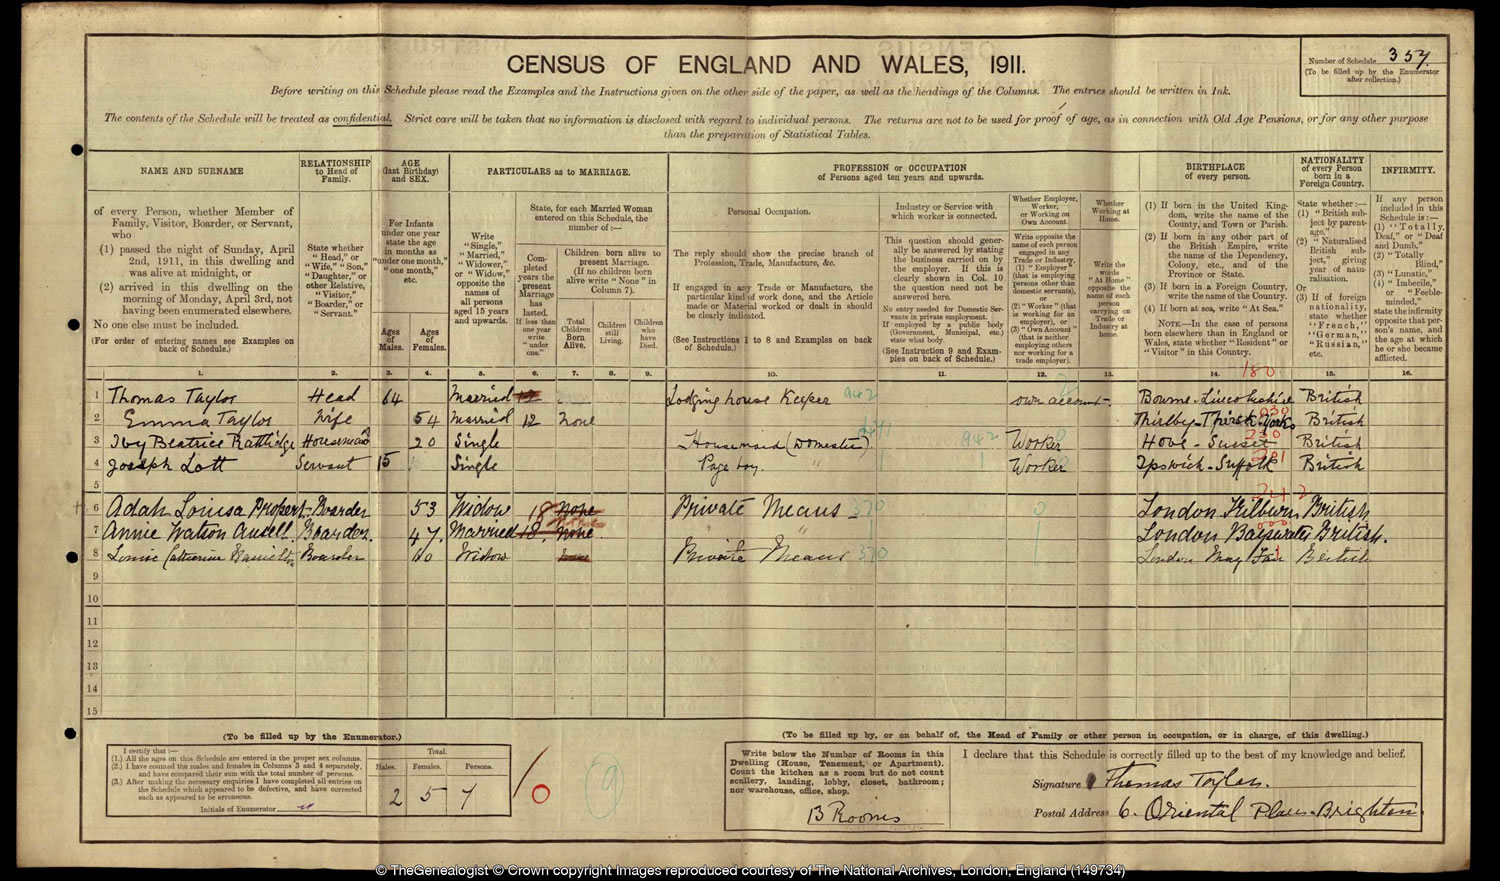 1911 census on TheGenealogist finds Joseph as a 15 year old Page Boy servant in a Brighton Lodging House